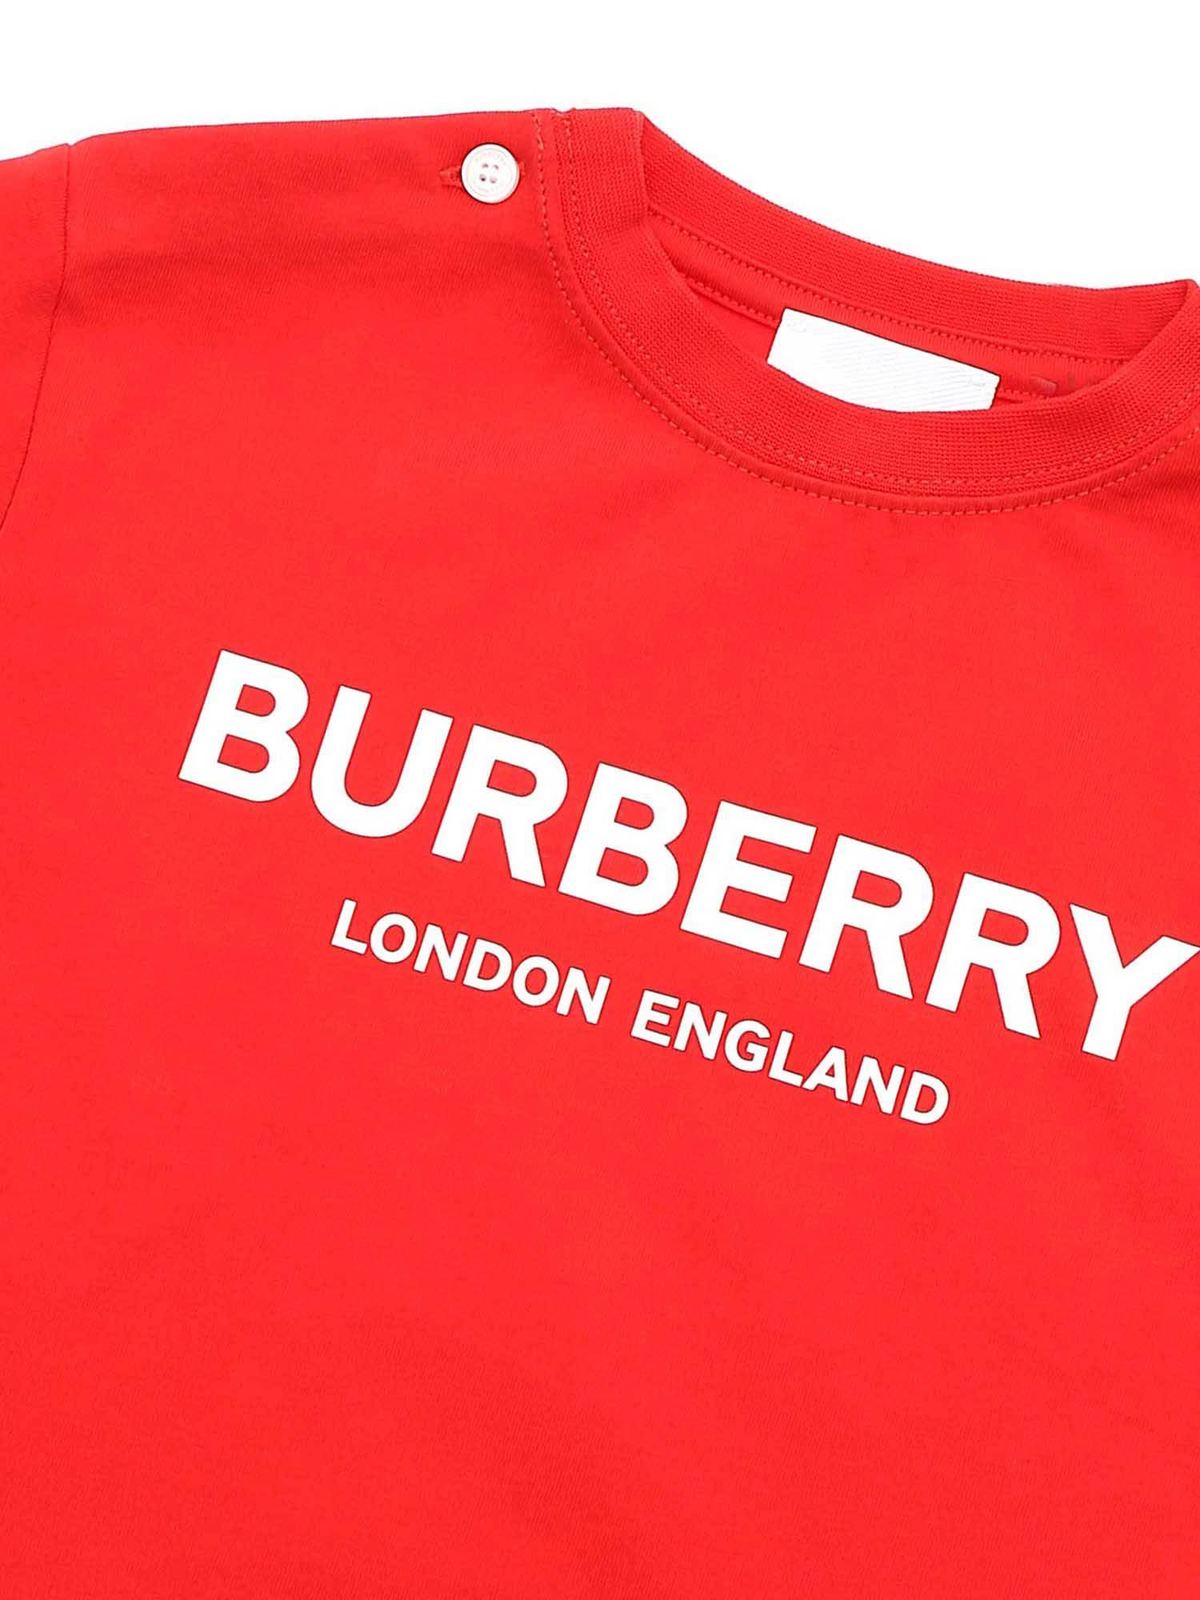 T-shirt in red with white logo 